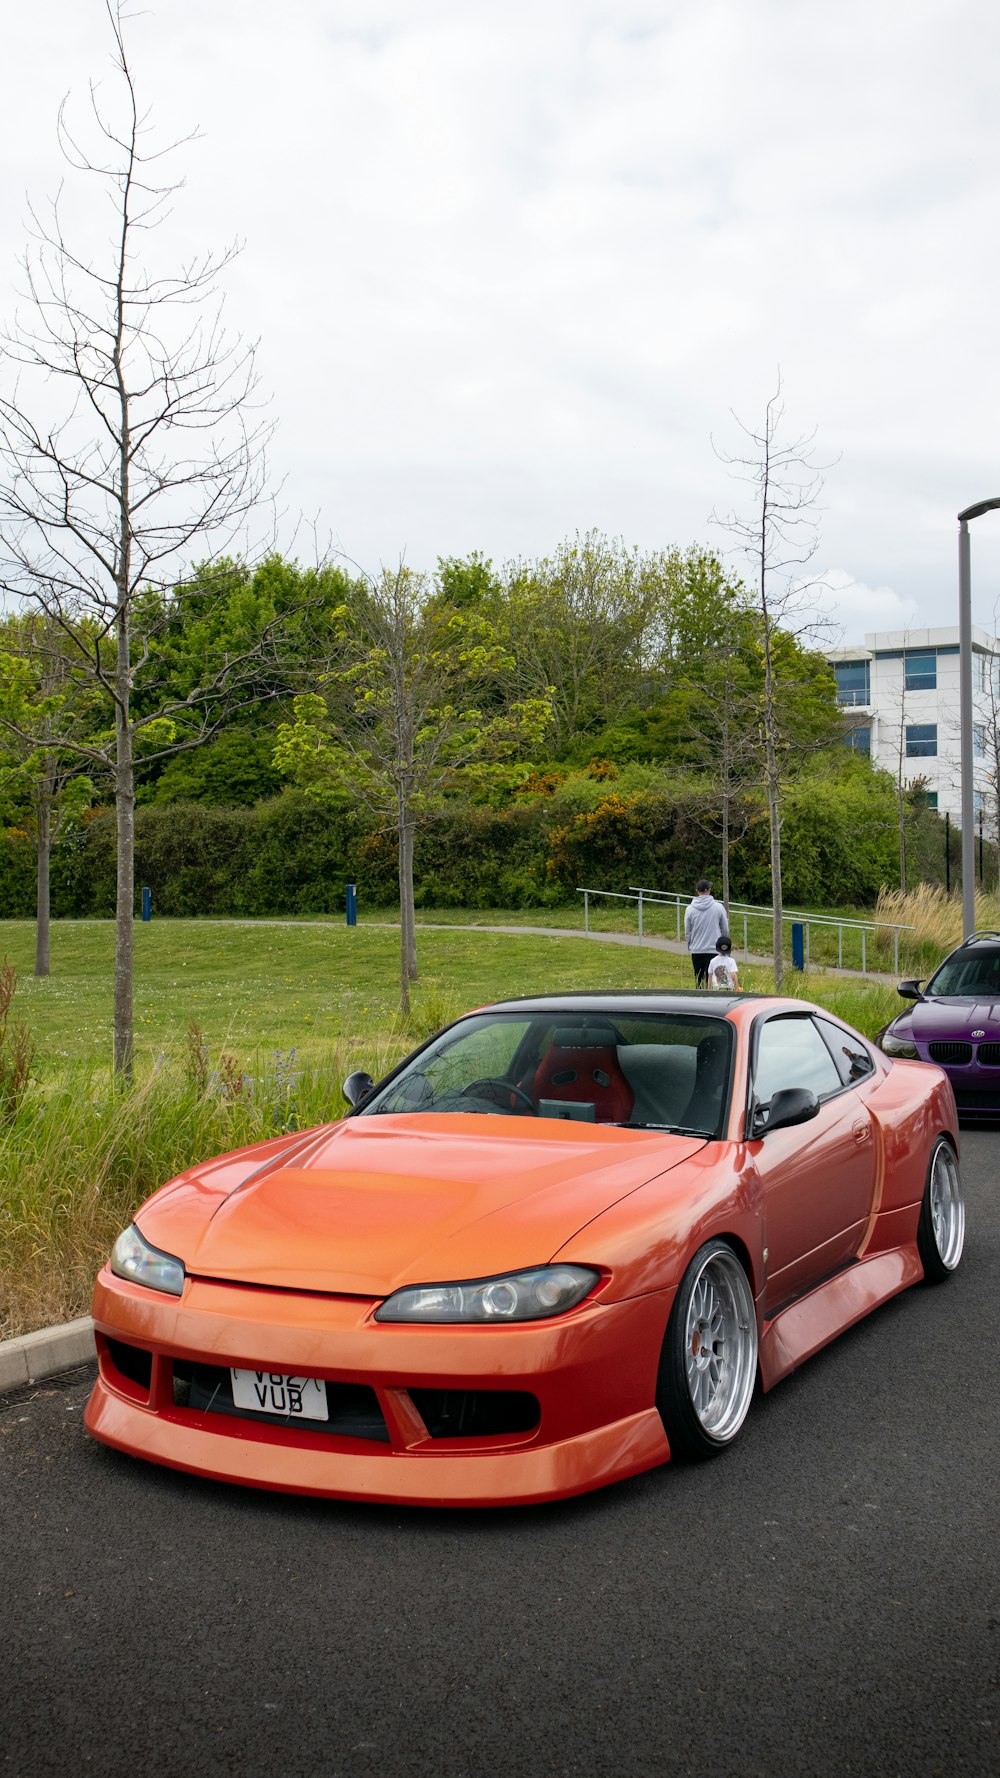 a red sports car parked next to a purple car